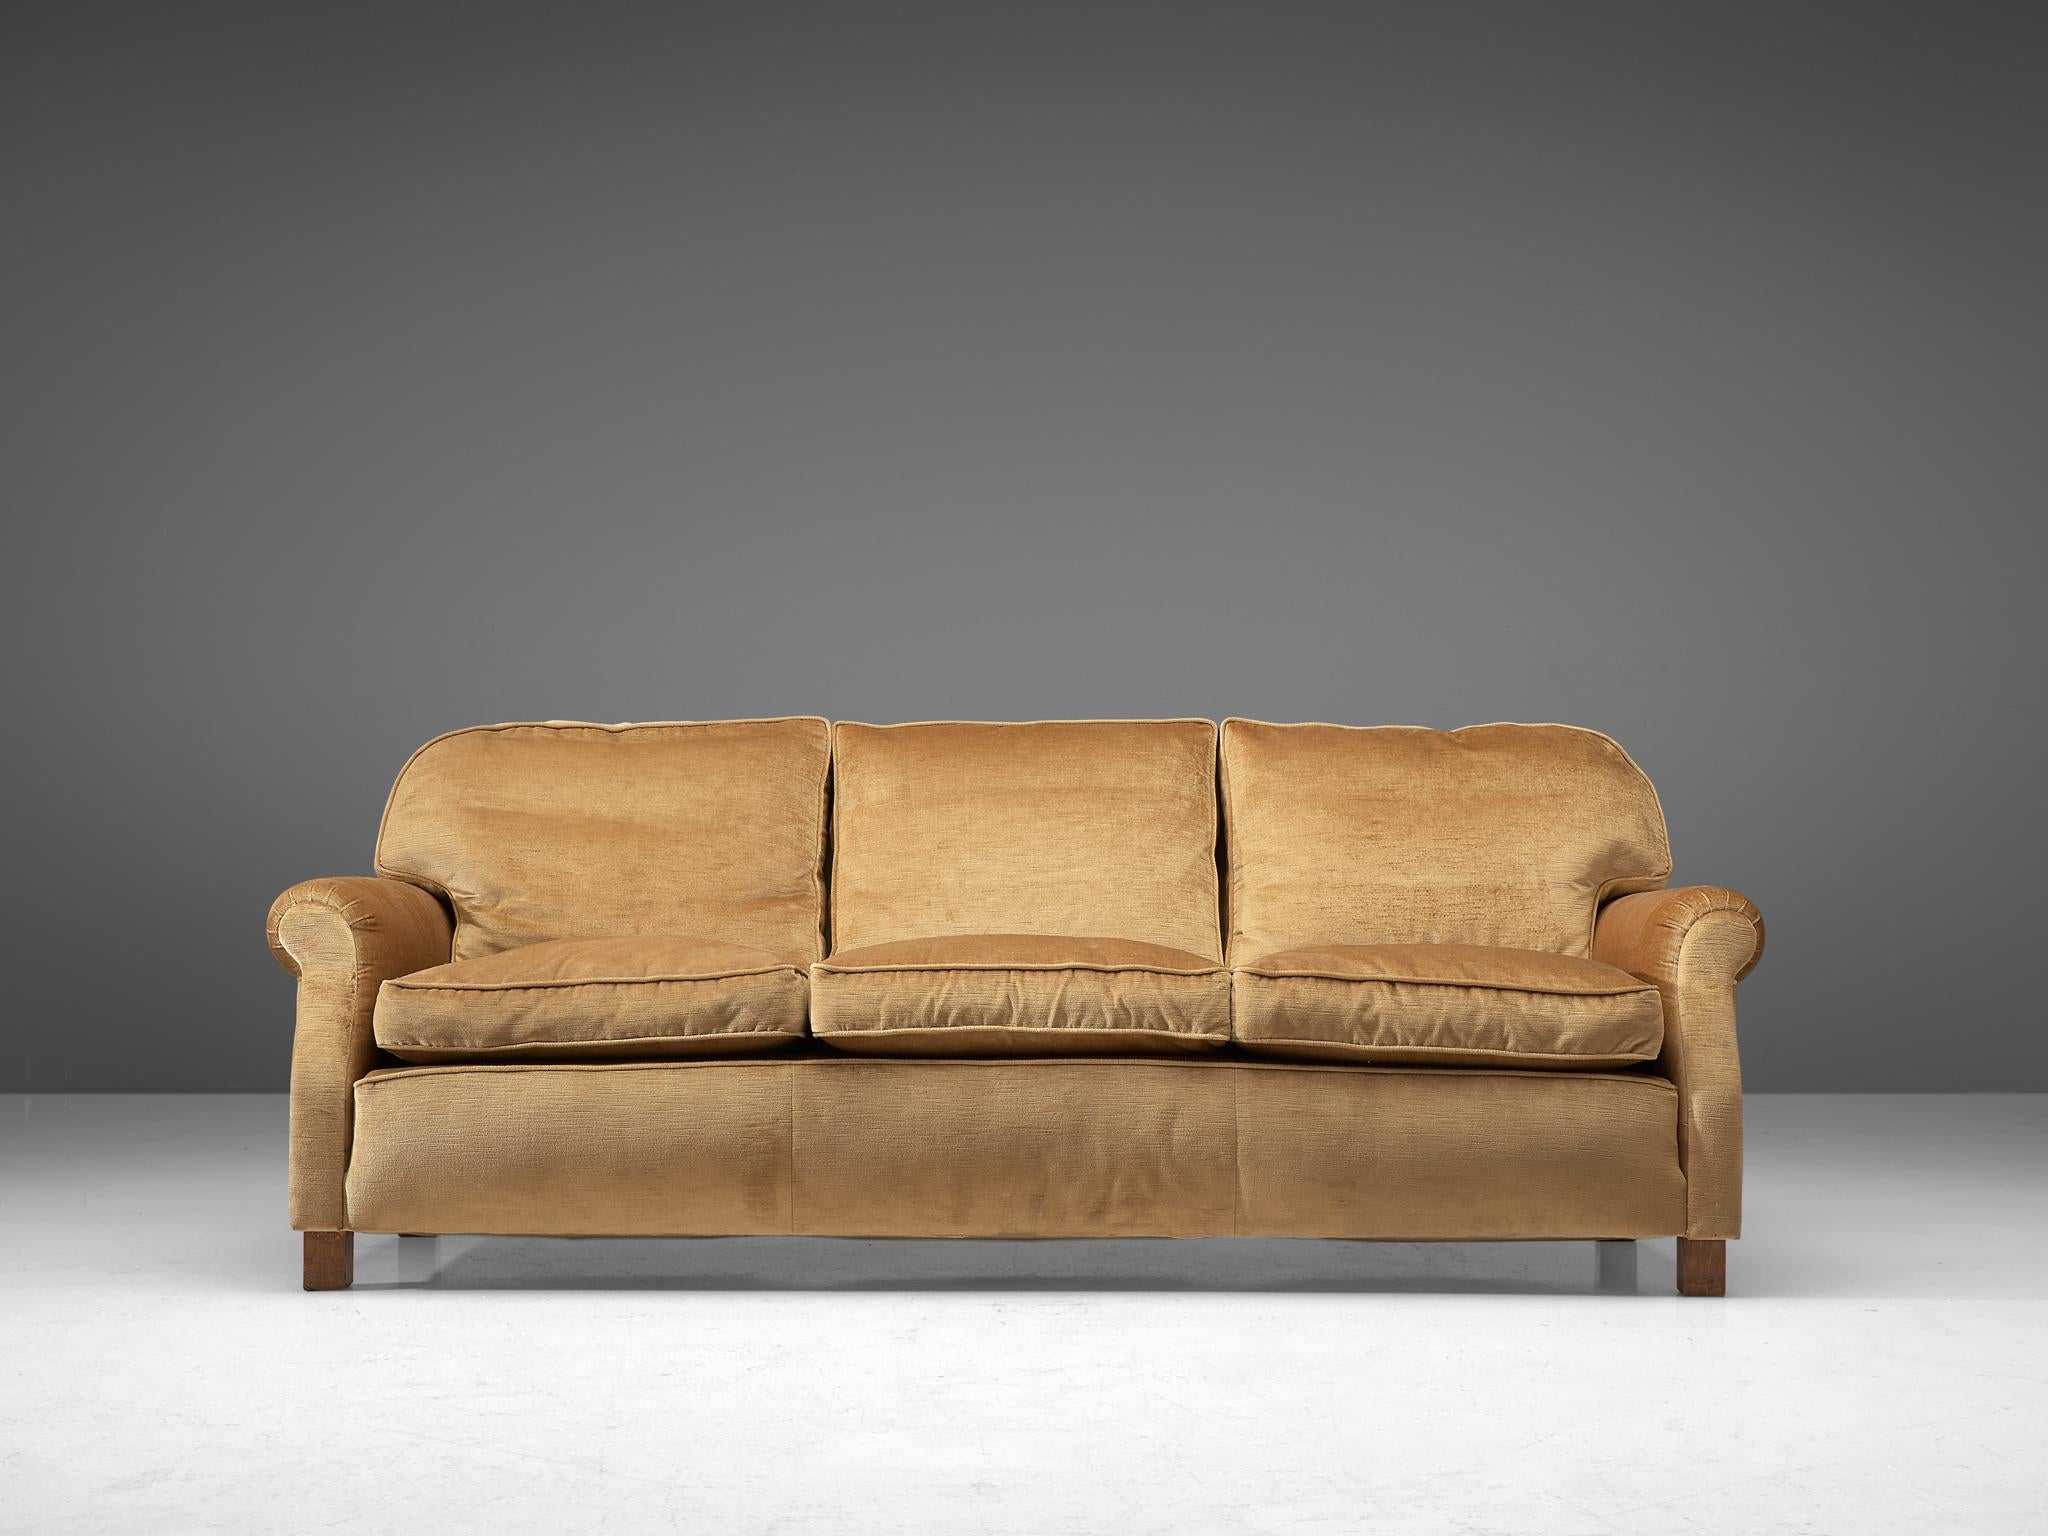 Three-seat sofa, velvet and wood, France, 1940s.

Grand and comfortable three-seat sofa in beige velvet upholstery. Very comfortable sofa that features a deep and thick seat with thick cushions. The armrests are curved and give the sofa and more